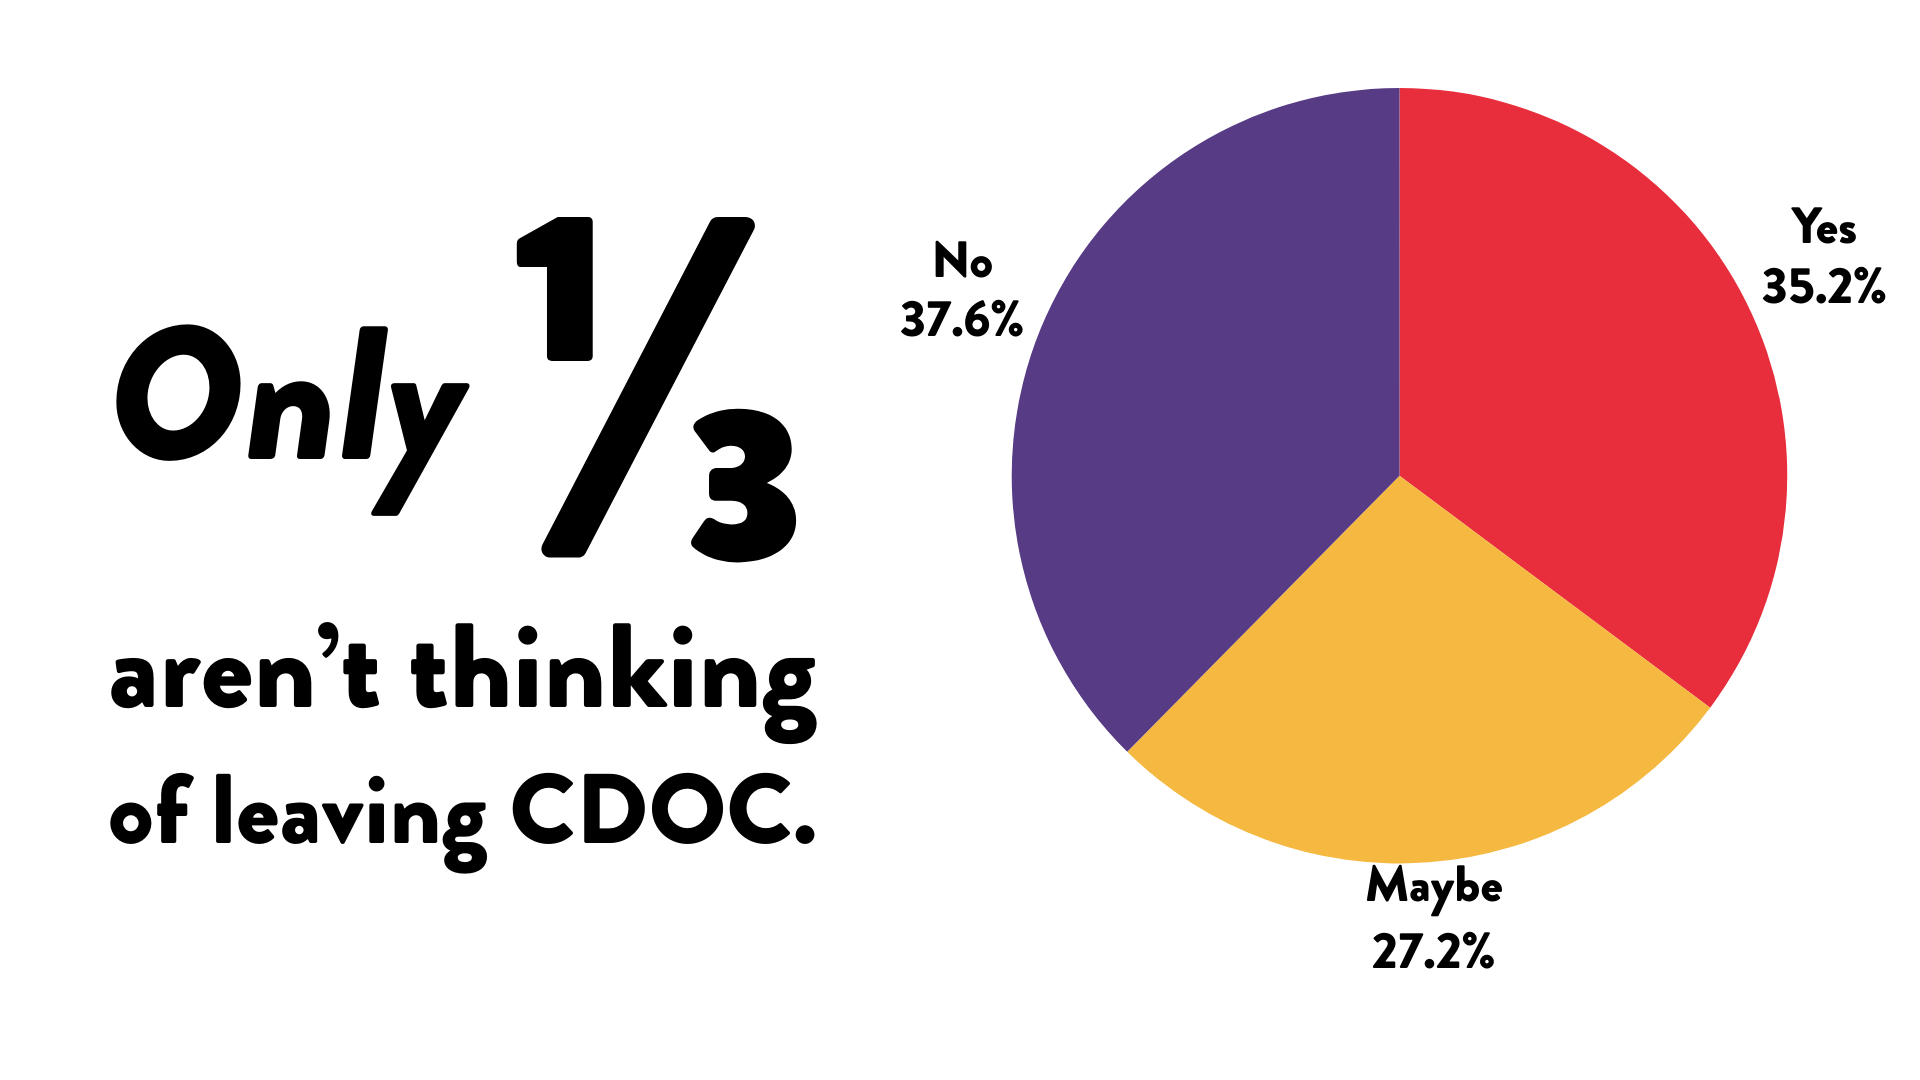 Only 1/3 of survey respondents aren't thinking of leaving CDOC.